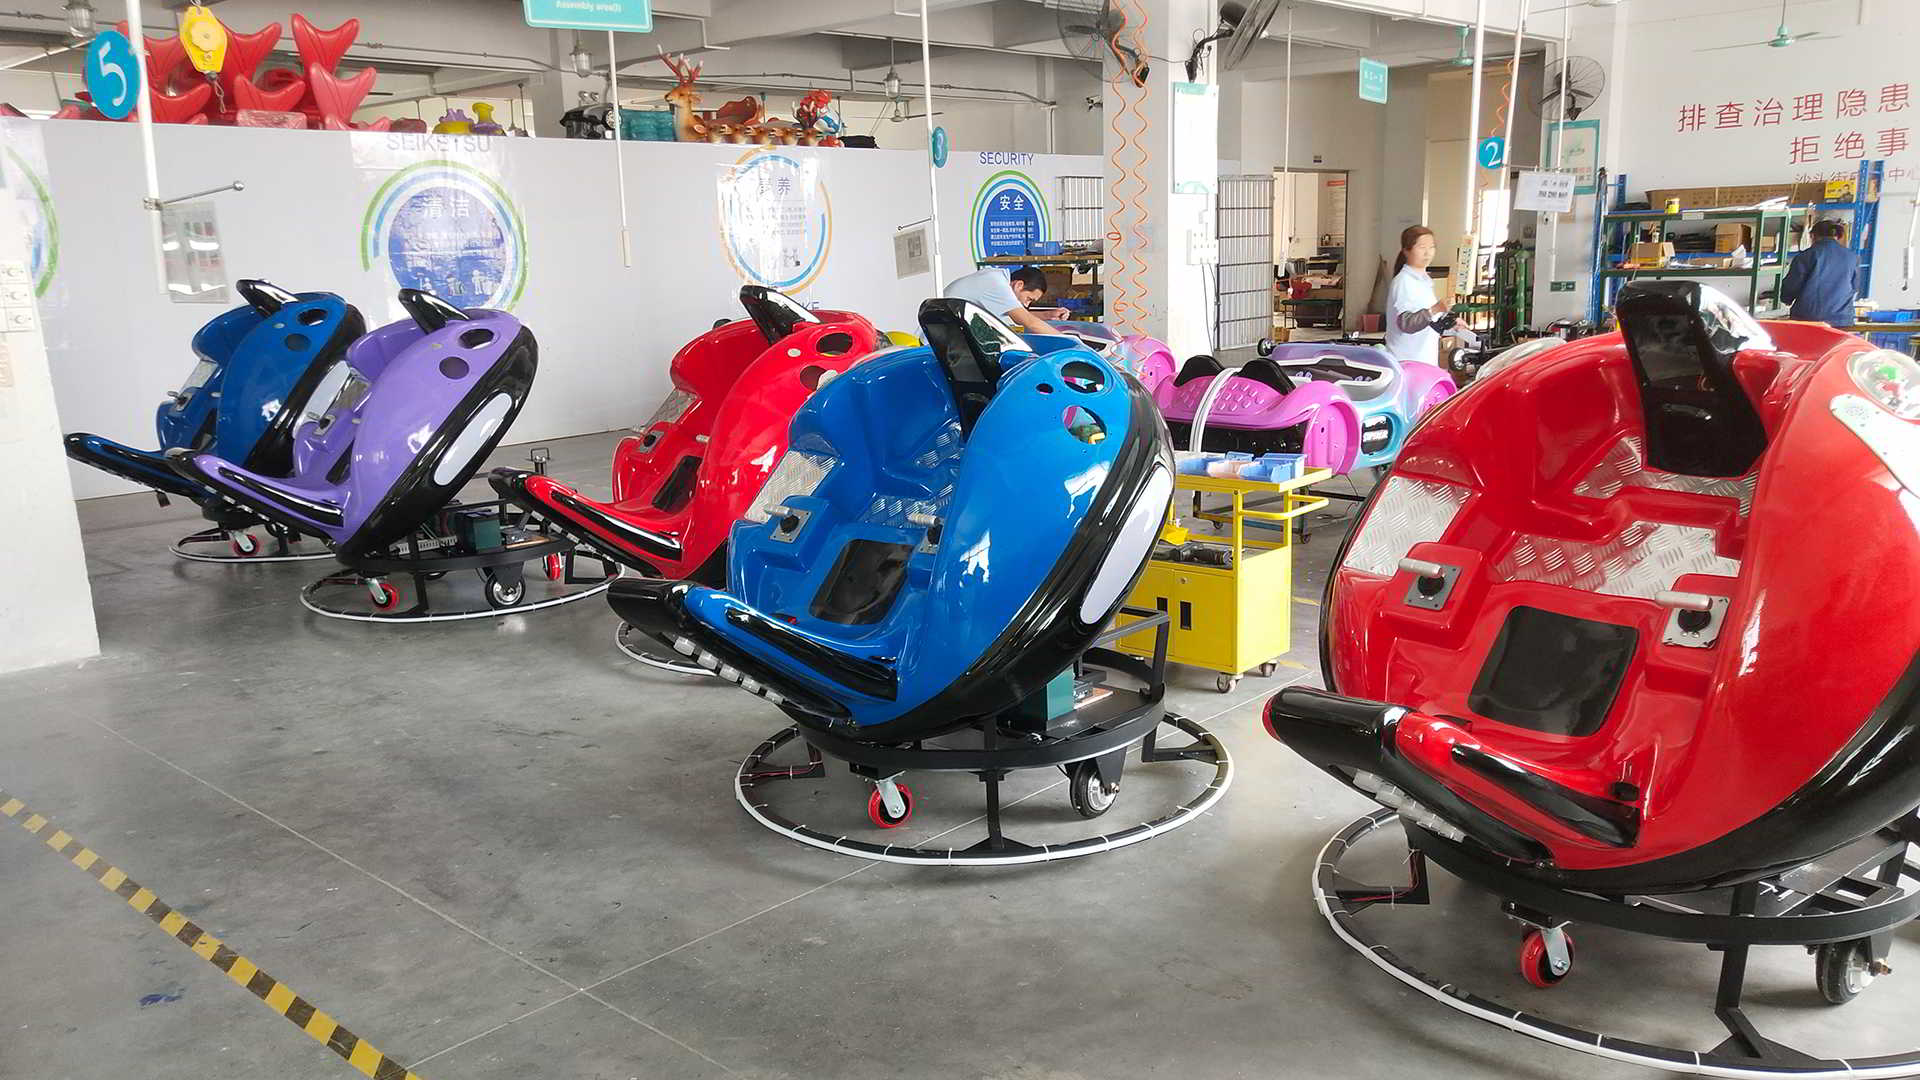 What does the Amusement Bumper Car Mainly Consist of